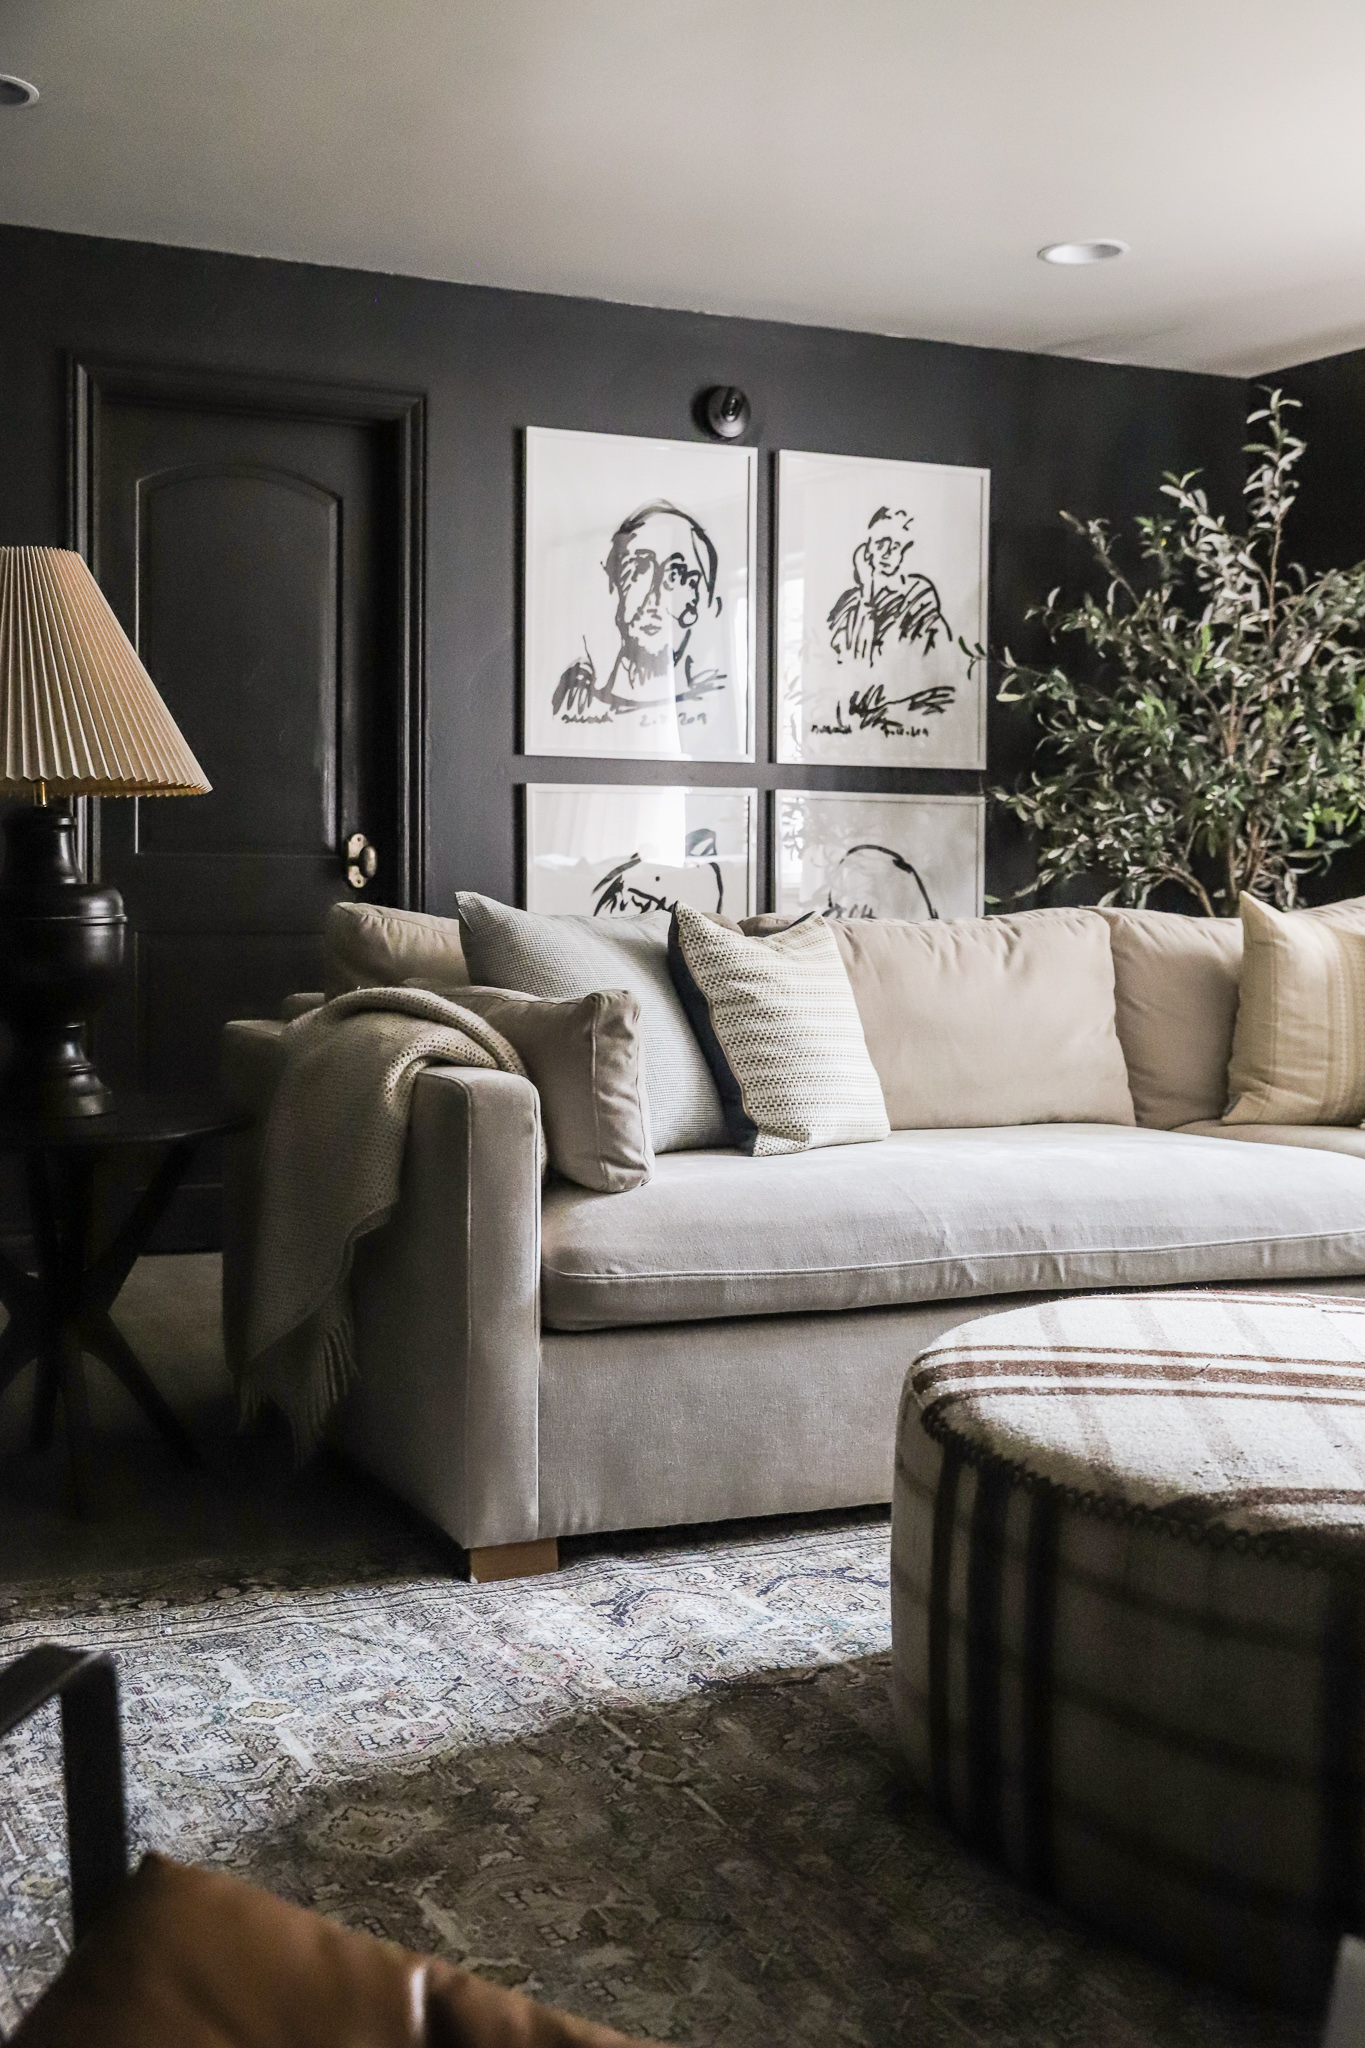 From Blah to Fantastic: 7 Ways to Style the Wall Behind the Sofa